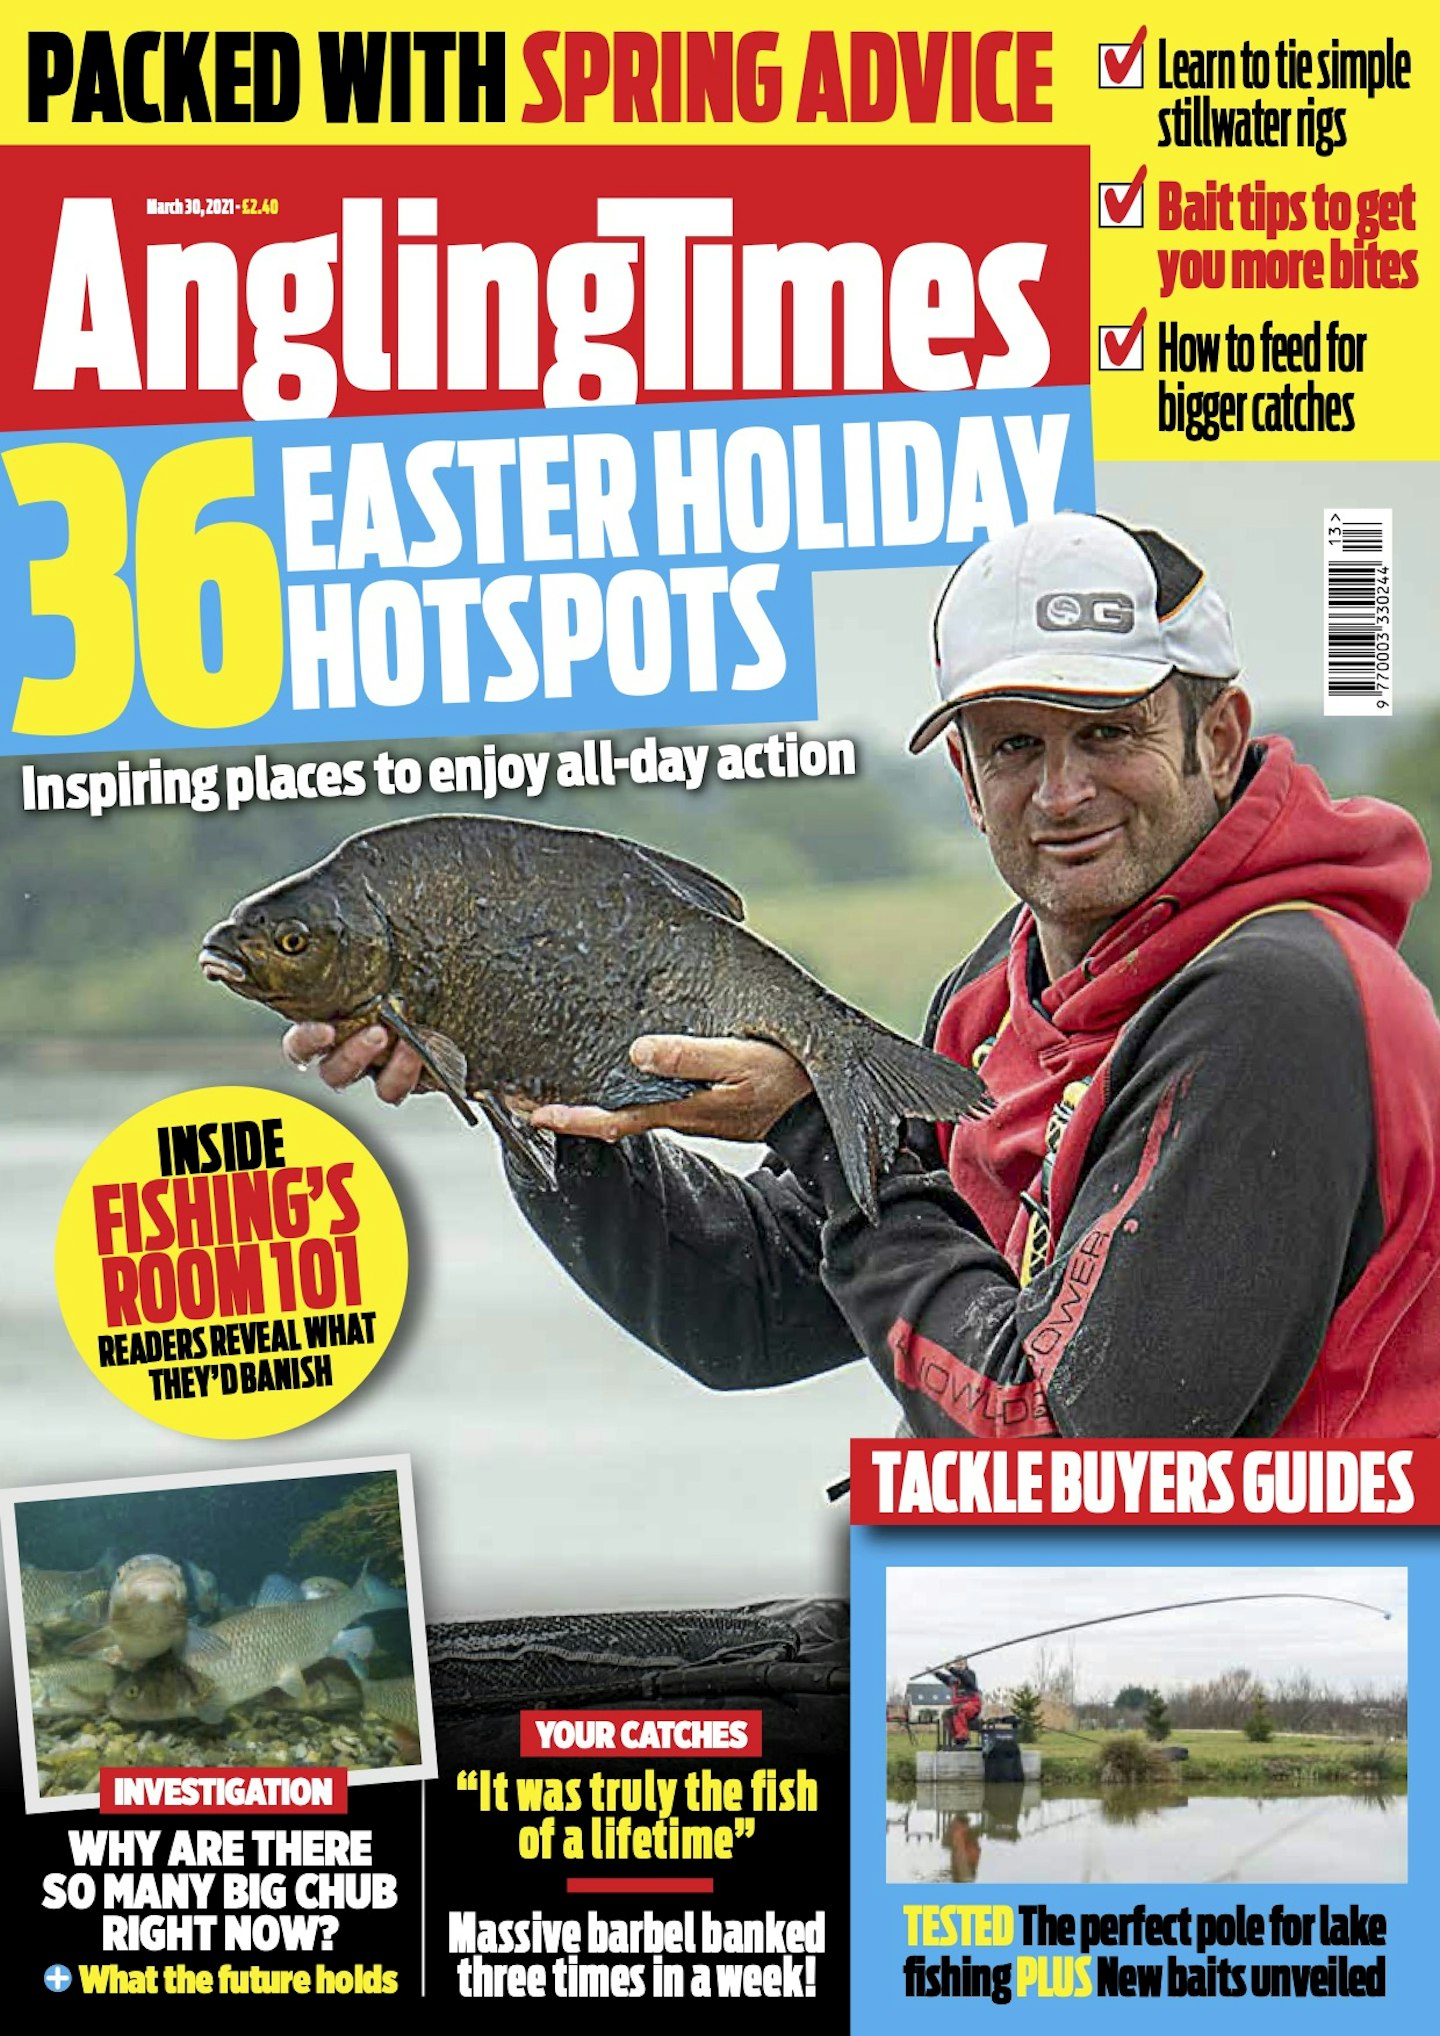 Angling Times March 30th issue is out NOW!